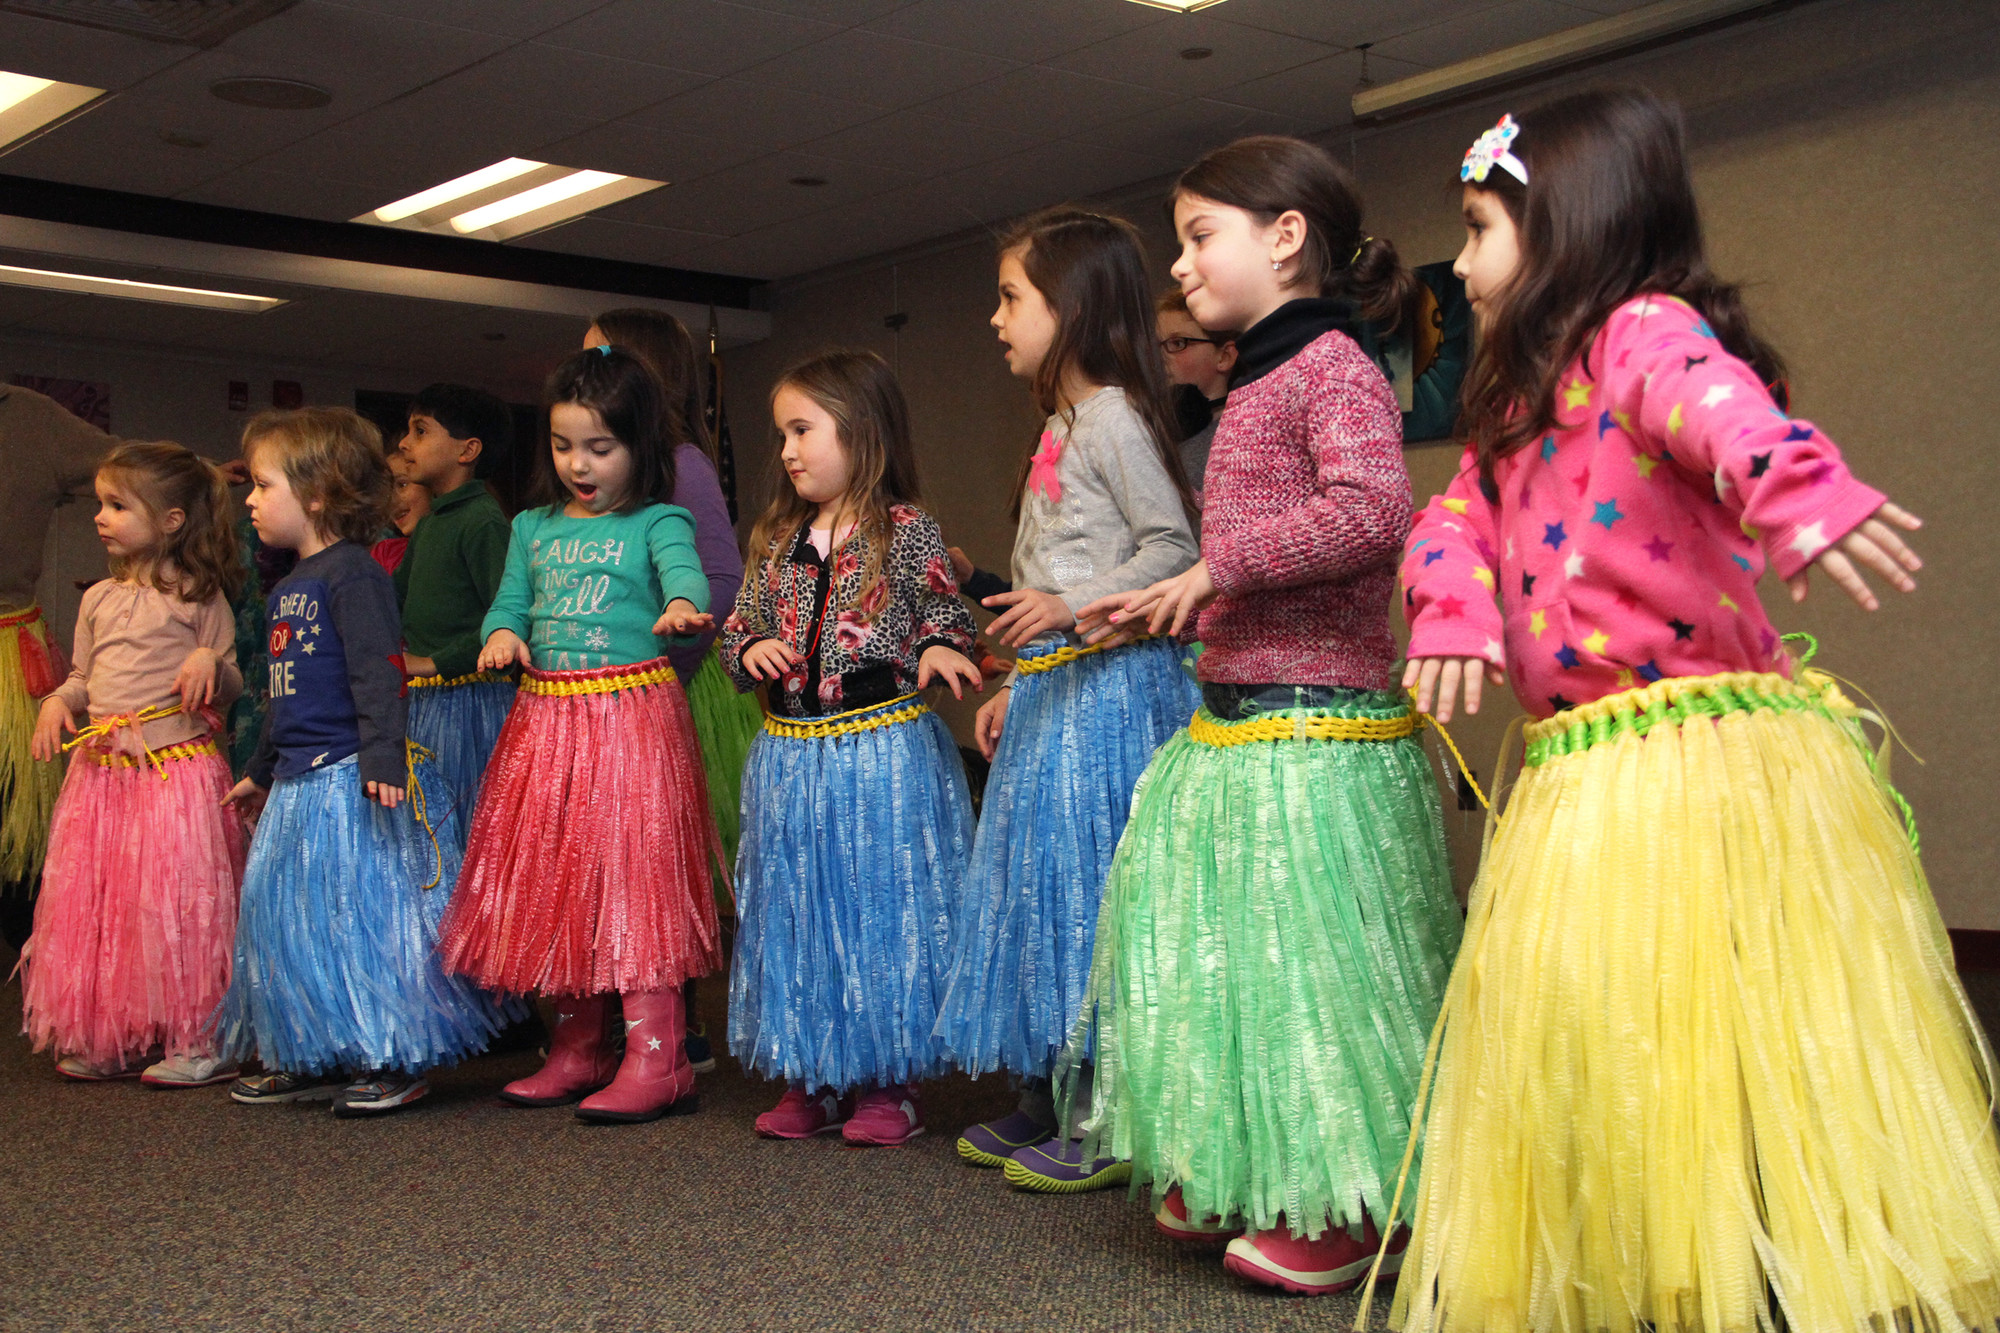 Much of the audience at the show got the chance to put on their own grass skirts and dance the hula.